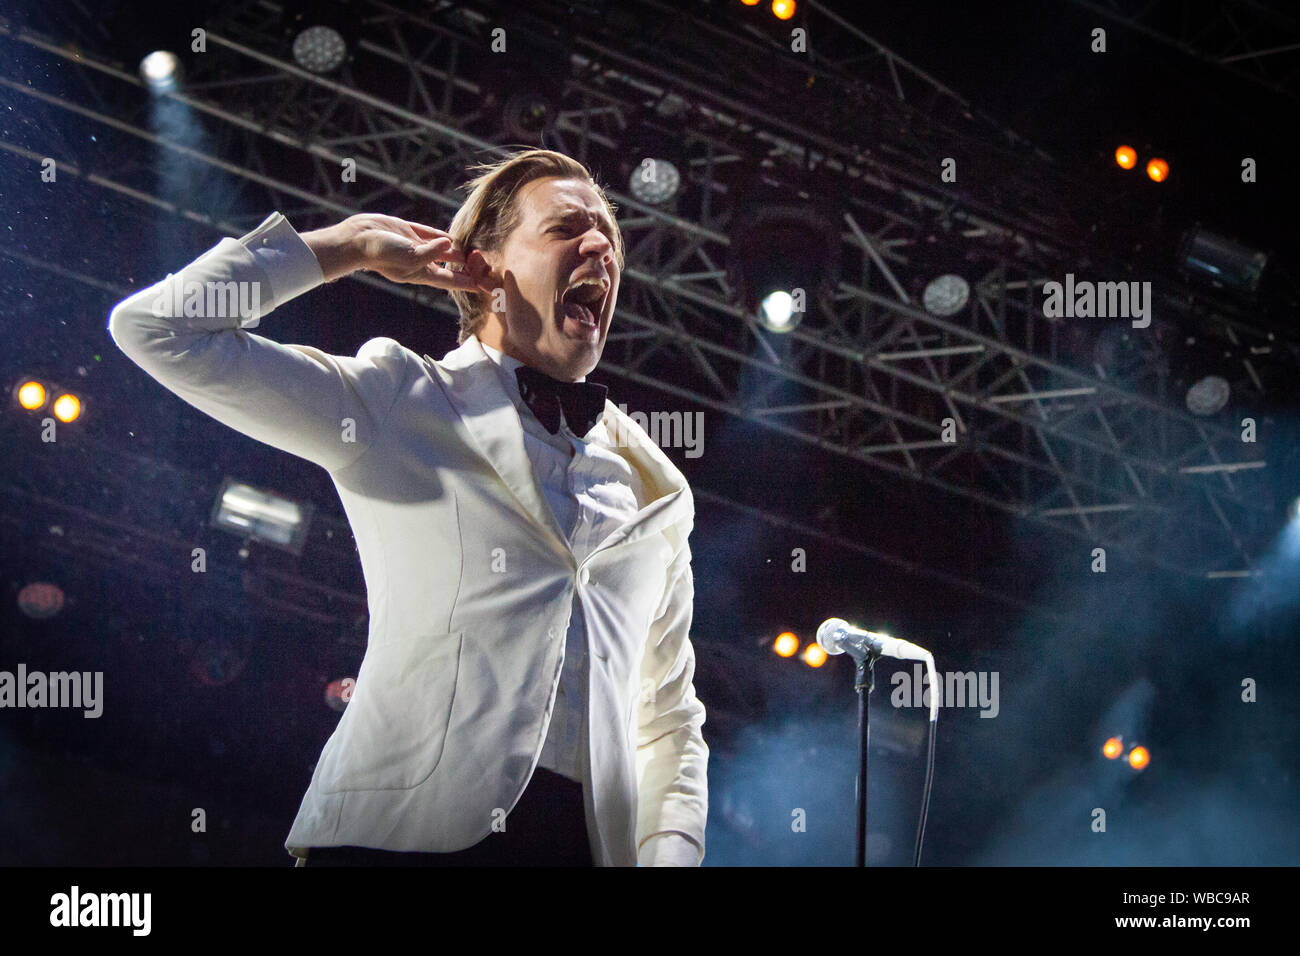 Trondheim, Norway. August 16th, 2019. The Swedish rock band The Hives performs a live concert during the Norwegian music festival Pstereo 2019 in Trondheim. Here vocalist Pelle Almqvist is seen live on stage. (Photo credit: Gonzales Photo - Tor Atle Kleven). Stock Photo